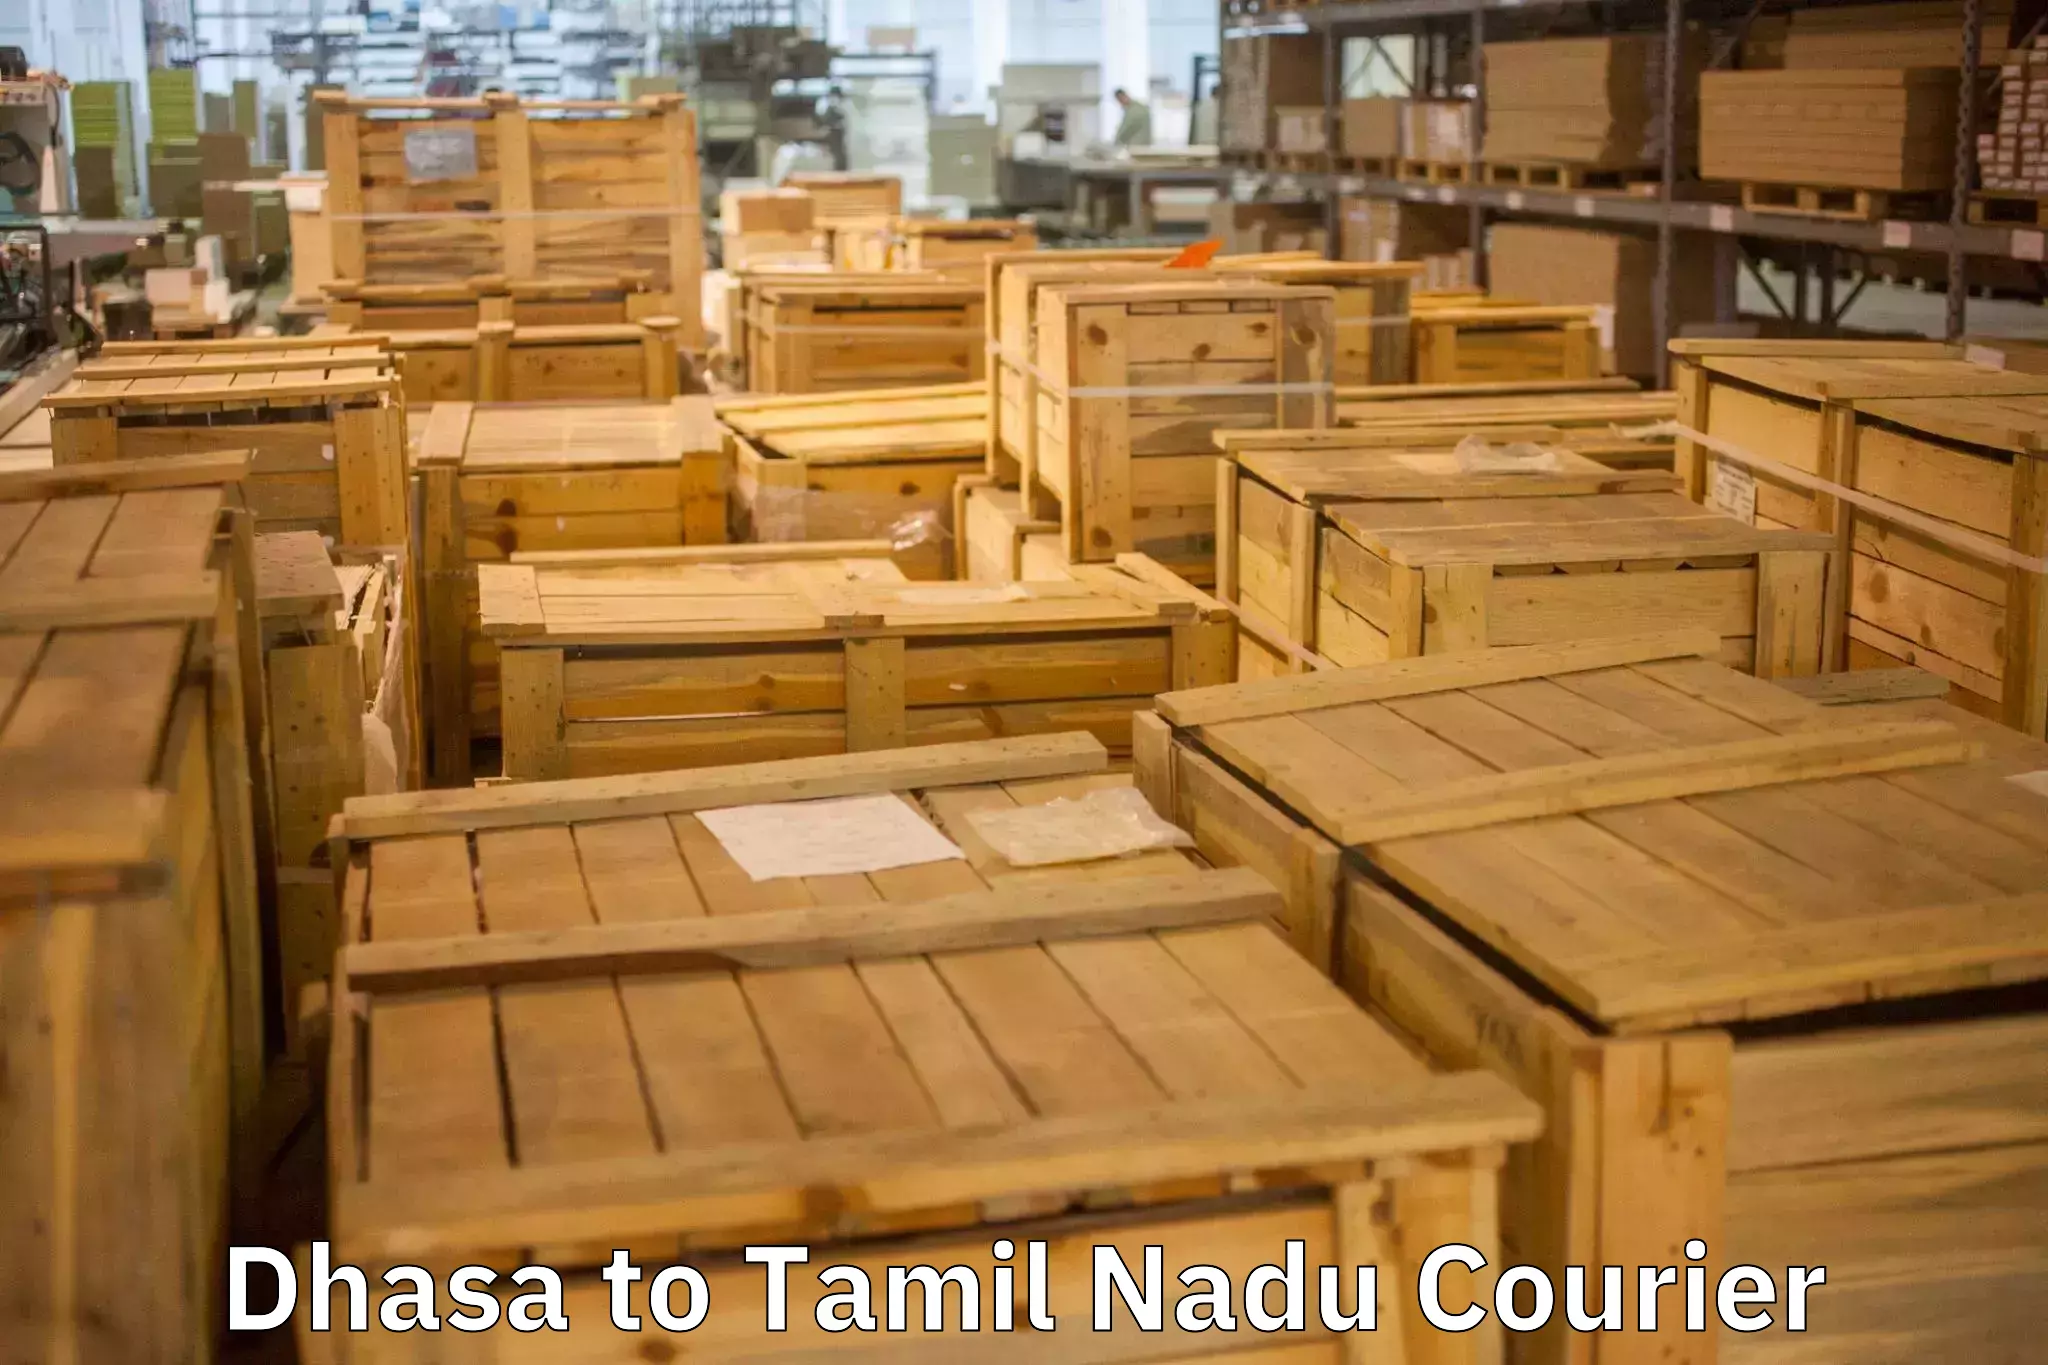 Furniture transport services Dhasa to Ennore Port Chennai